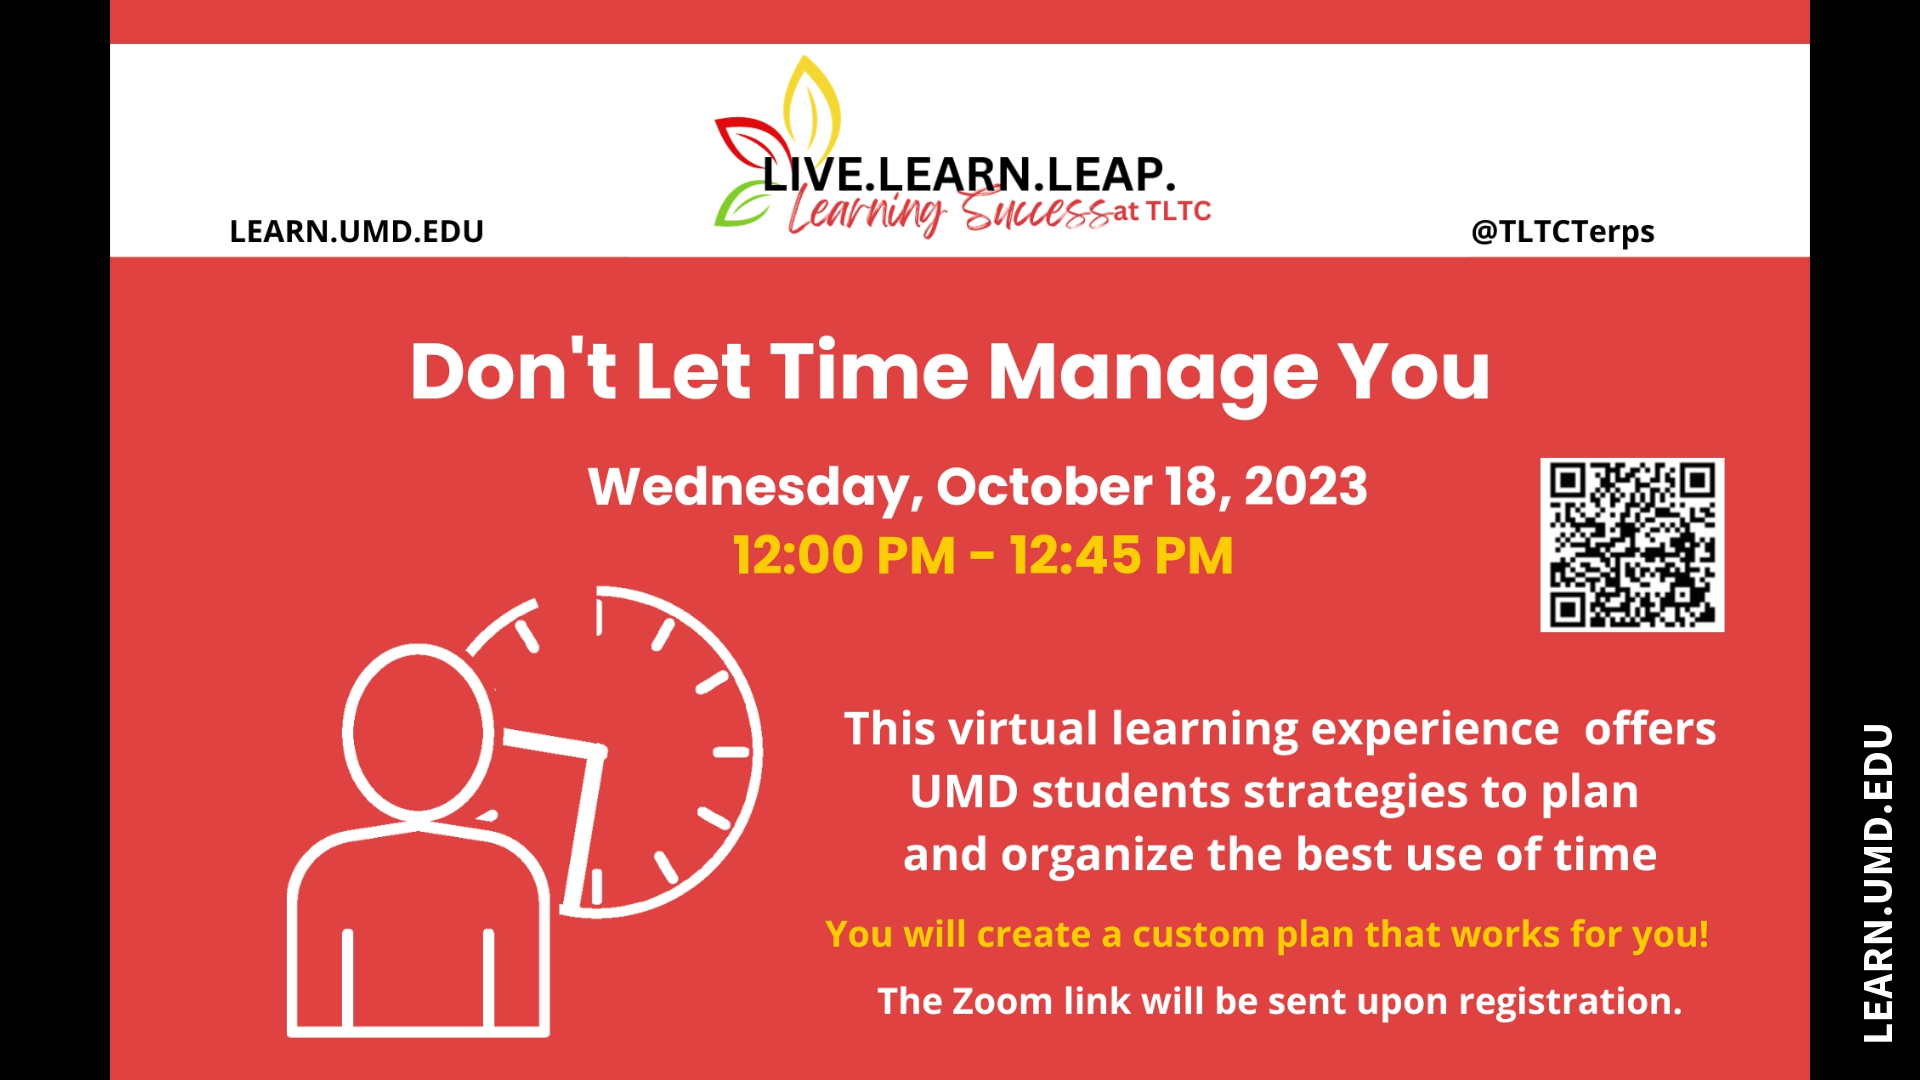 Image of a student and clock on a red background. Text: Don't Let Time Manage You. Wednesday, October 18, 2023, 12:00pm-12:45pm. This virtual learning experience offers UMD students strategies to plan and organize the best use of time. You will create a custom plan that works for you! The zoom link will be sent upon registration. learn.umd.edu